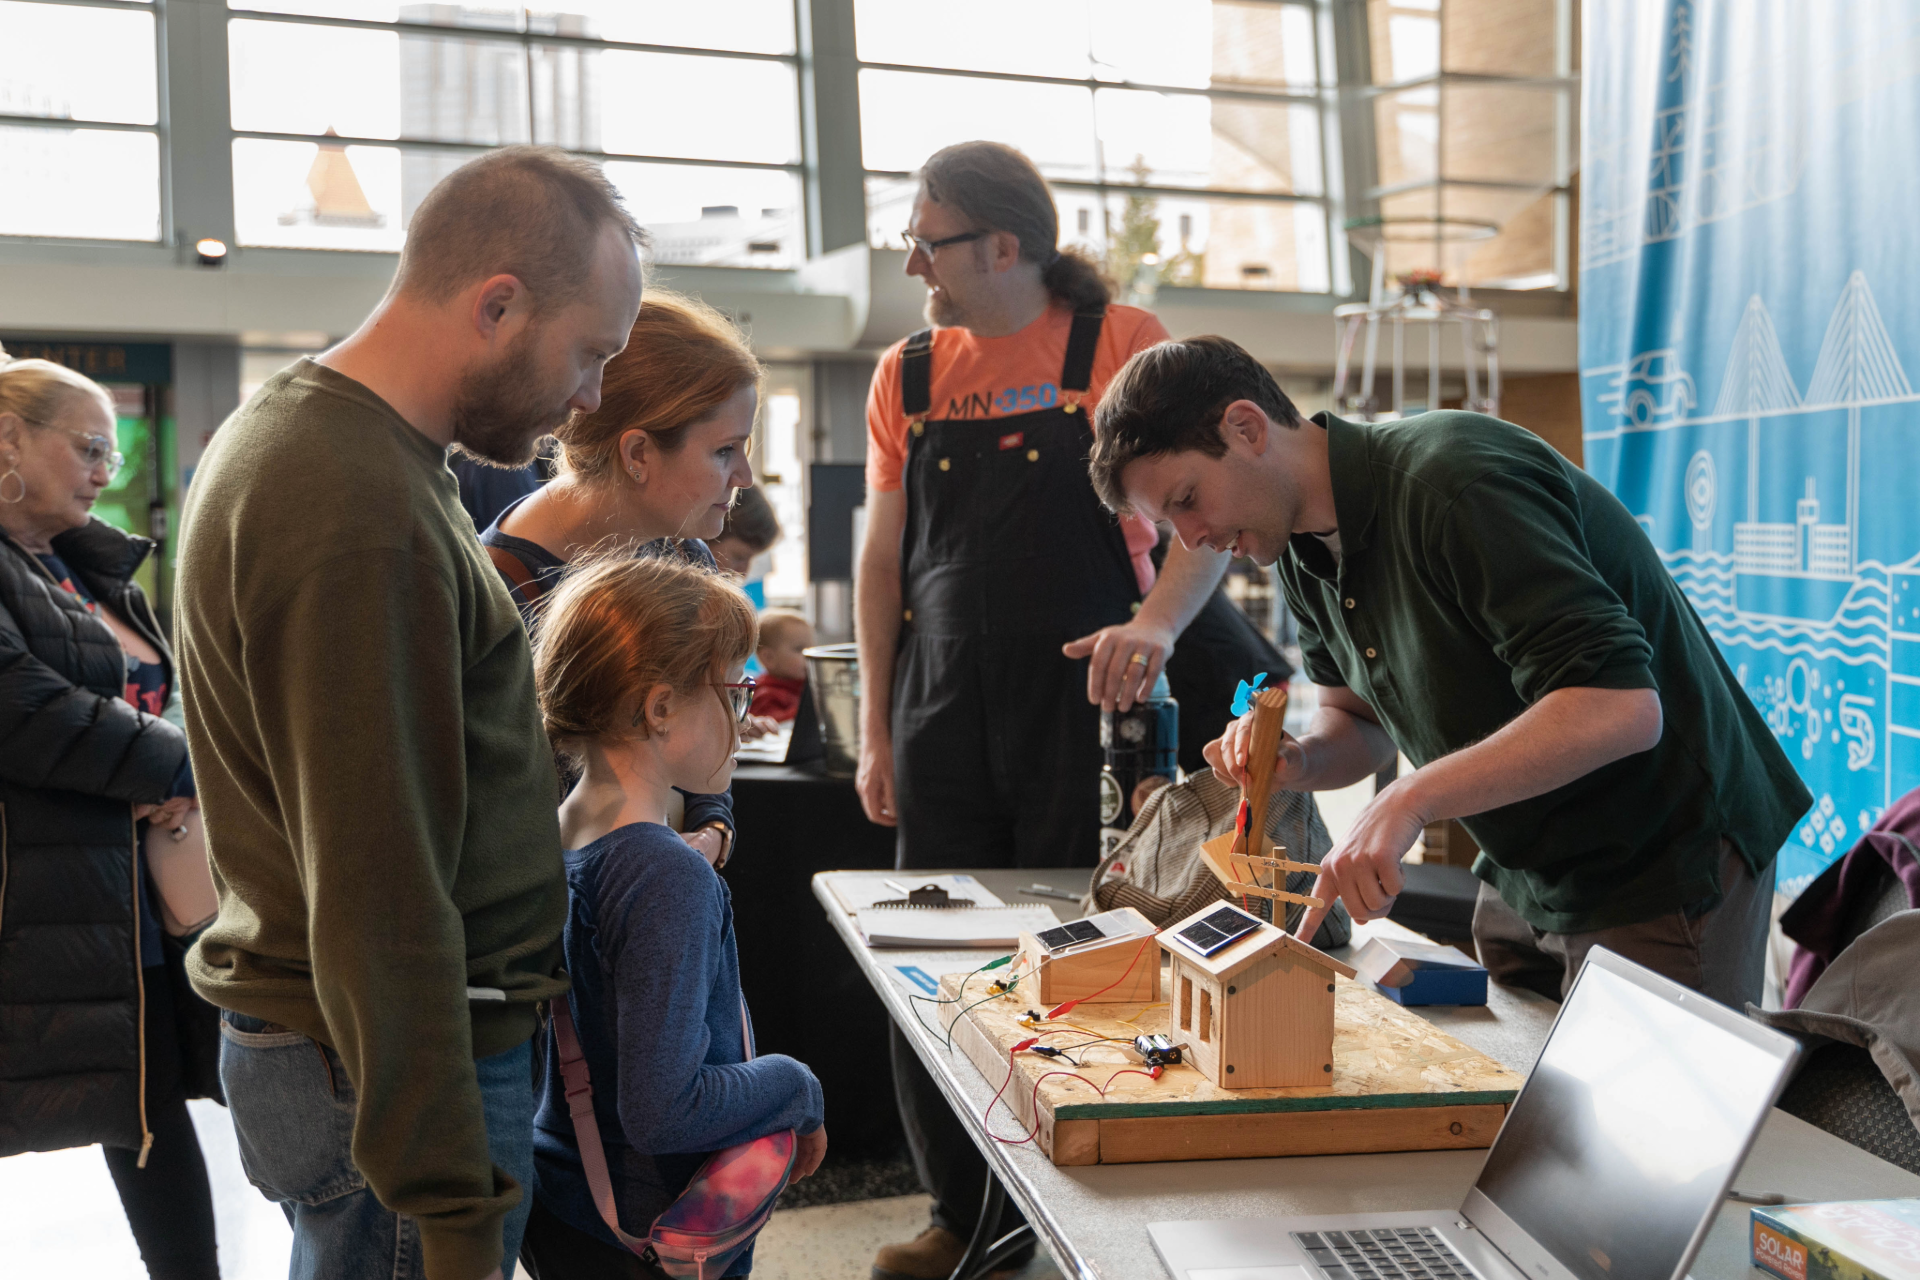 At the Science Museum of Minnesota’s Earth Day event on April 20, visitors will explore
engineering and Earth systems dynamics and hear from community partners who advocating for
change.